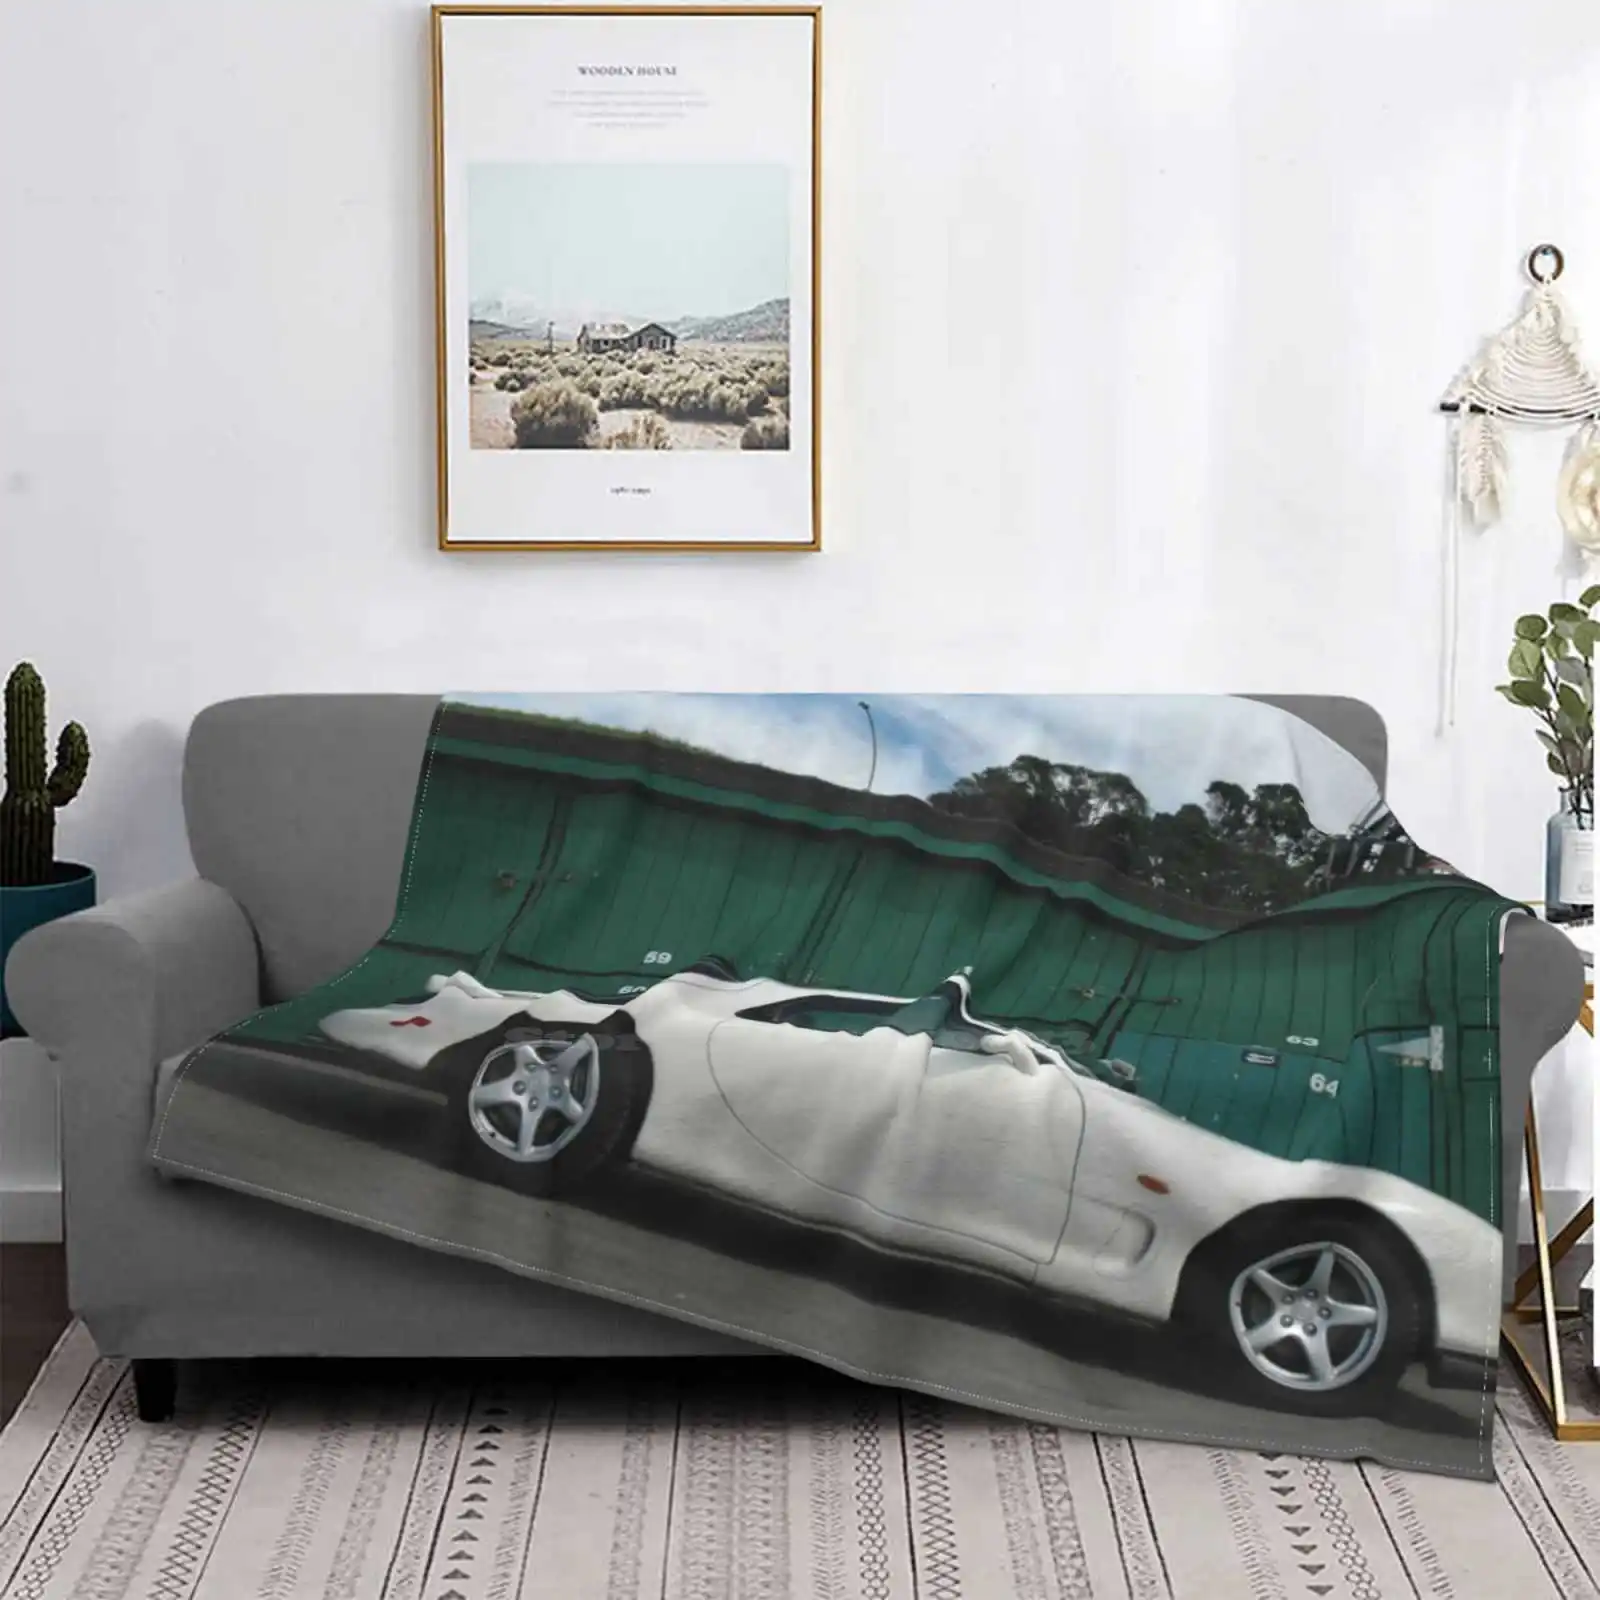 

Rx-7 Side View Top Quality Comfortable Bed Sofa Soft Blanket Mazda Rx7 Rotary Engine Rotaries 13B 13B Rew Turbo Sports Cars